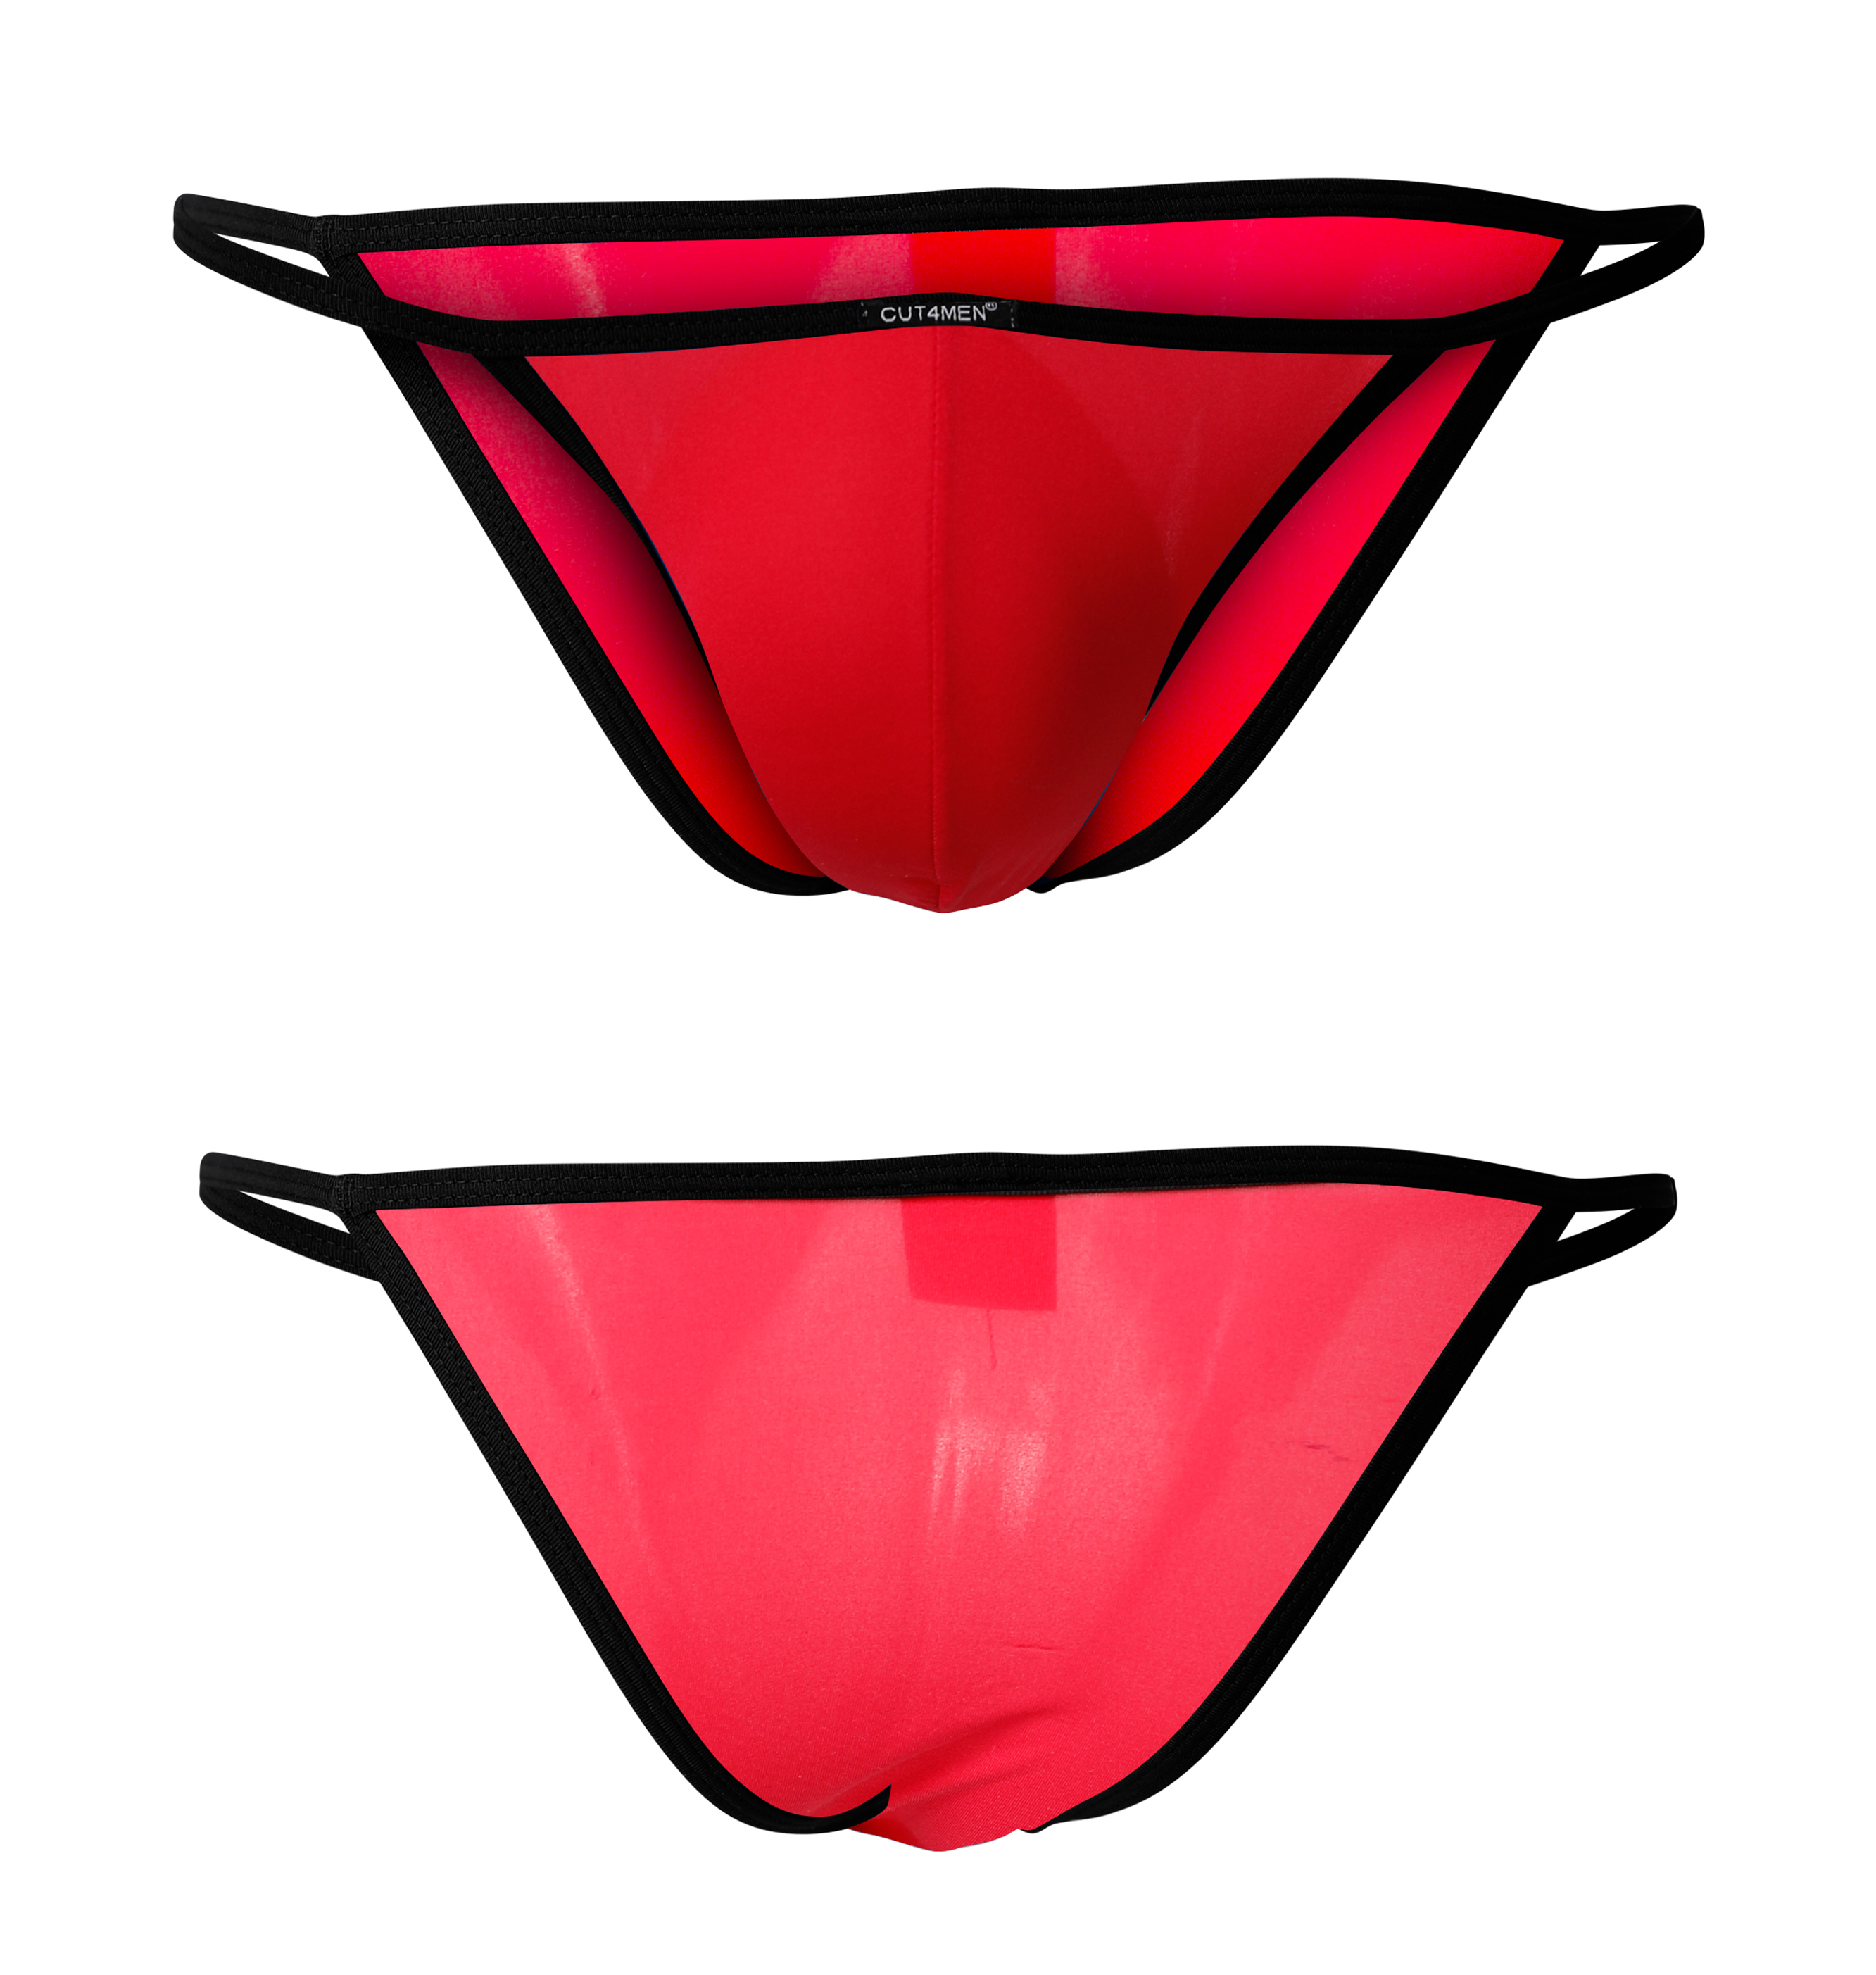 C4M Briefkini - Red OTS S (Special Edition)